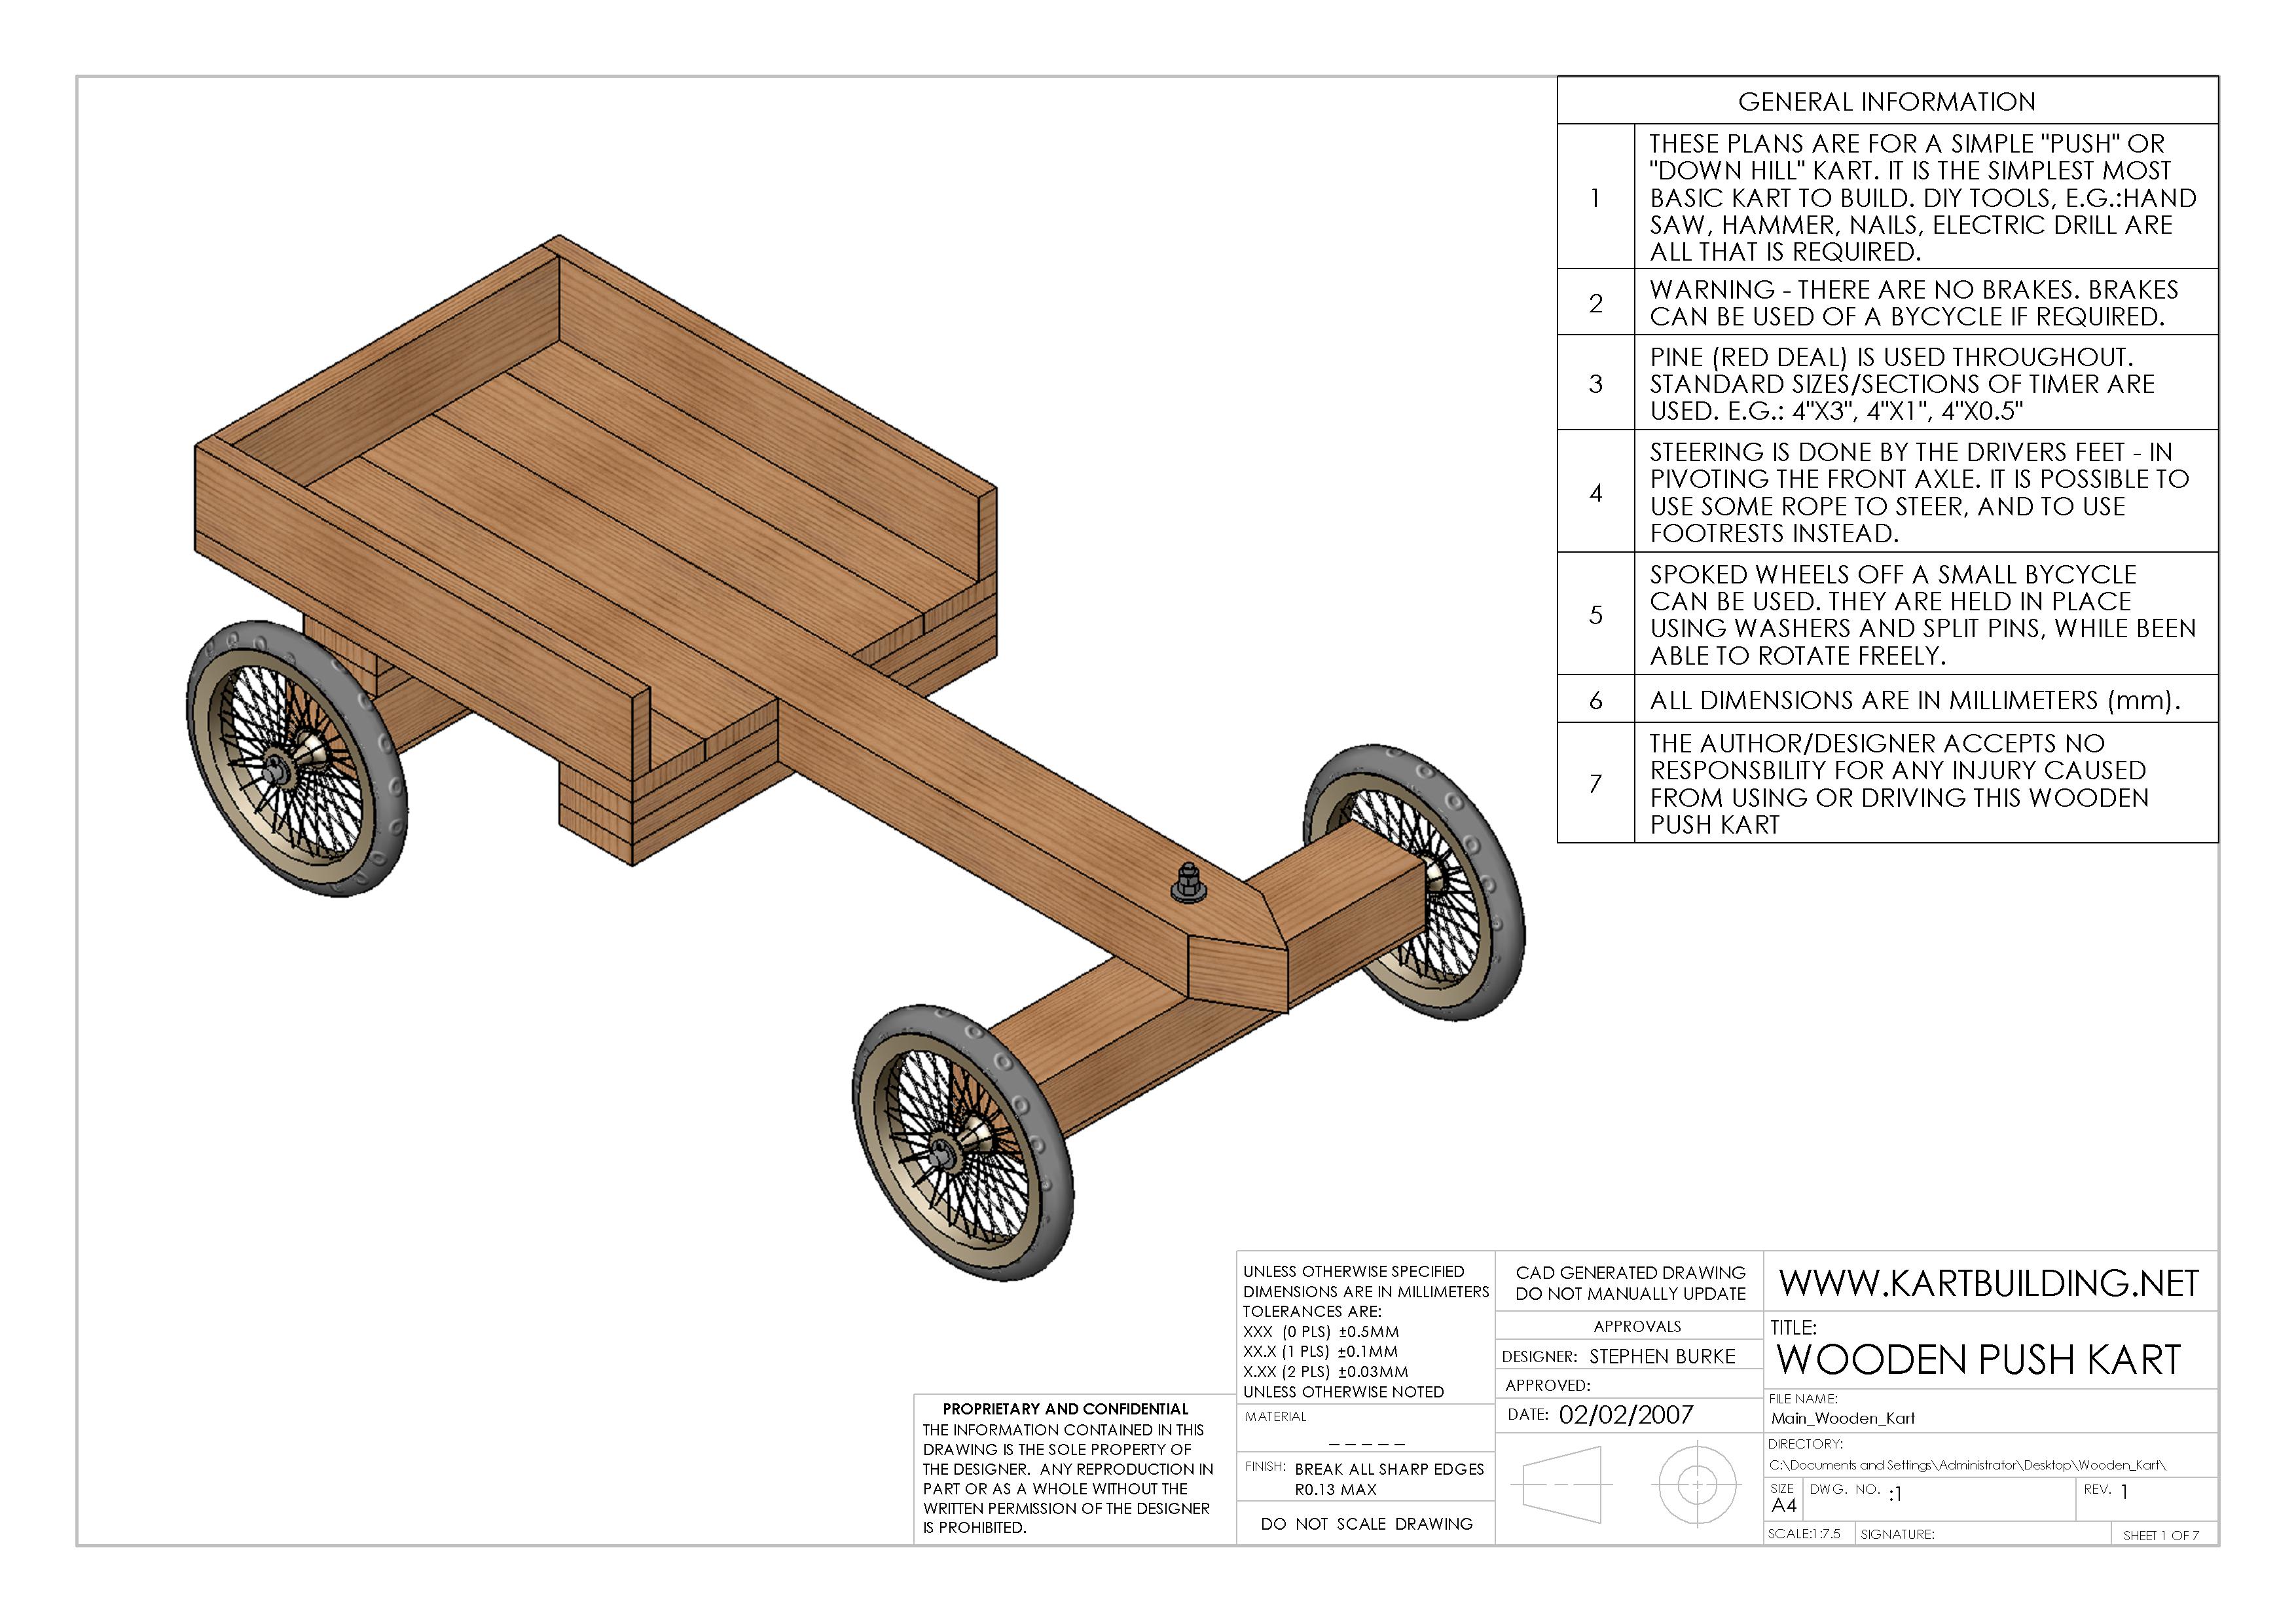 Wooden GoKart Plans вЂ“ Woodworking Project | Free Wood Plans.com